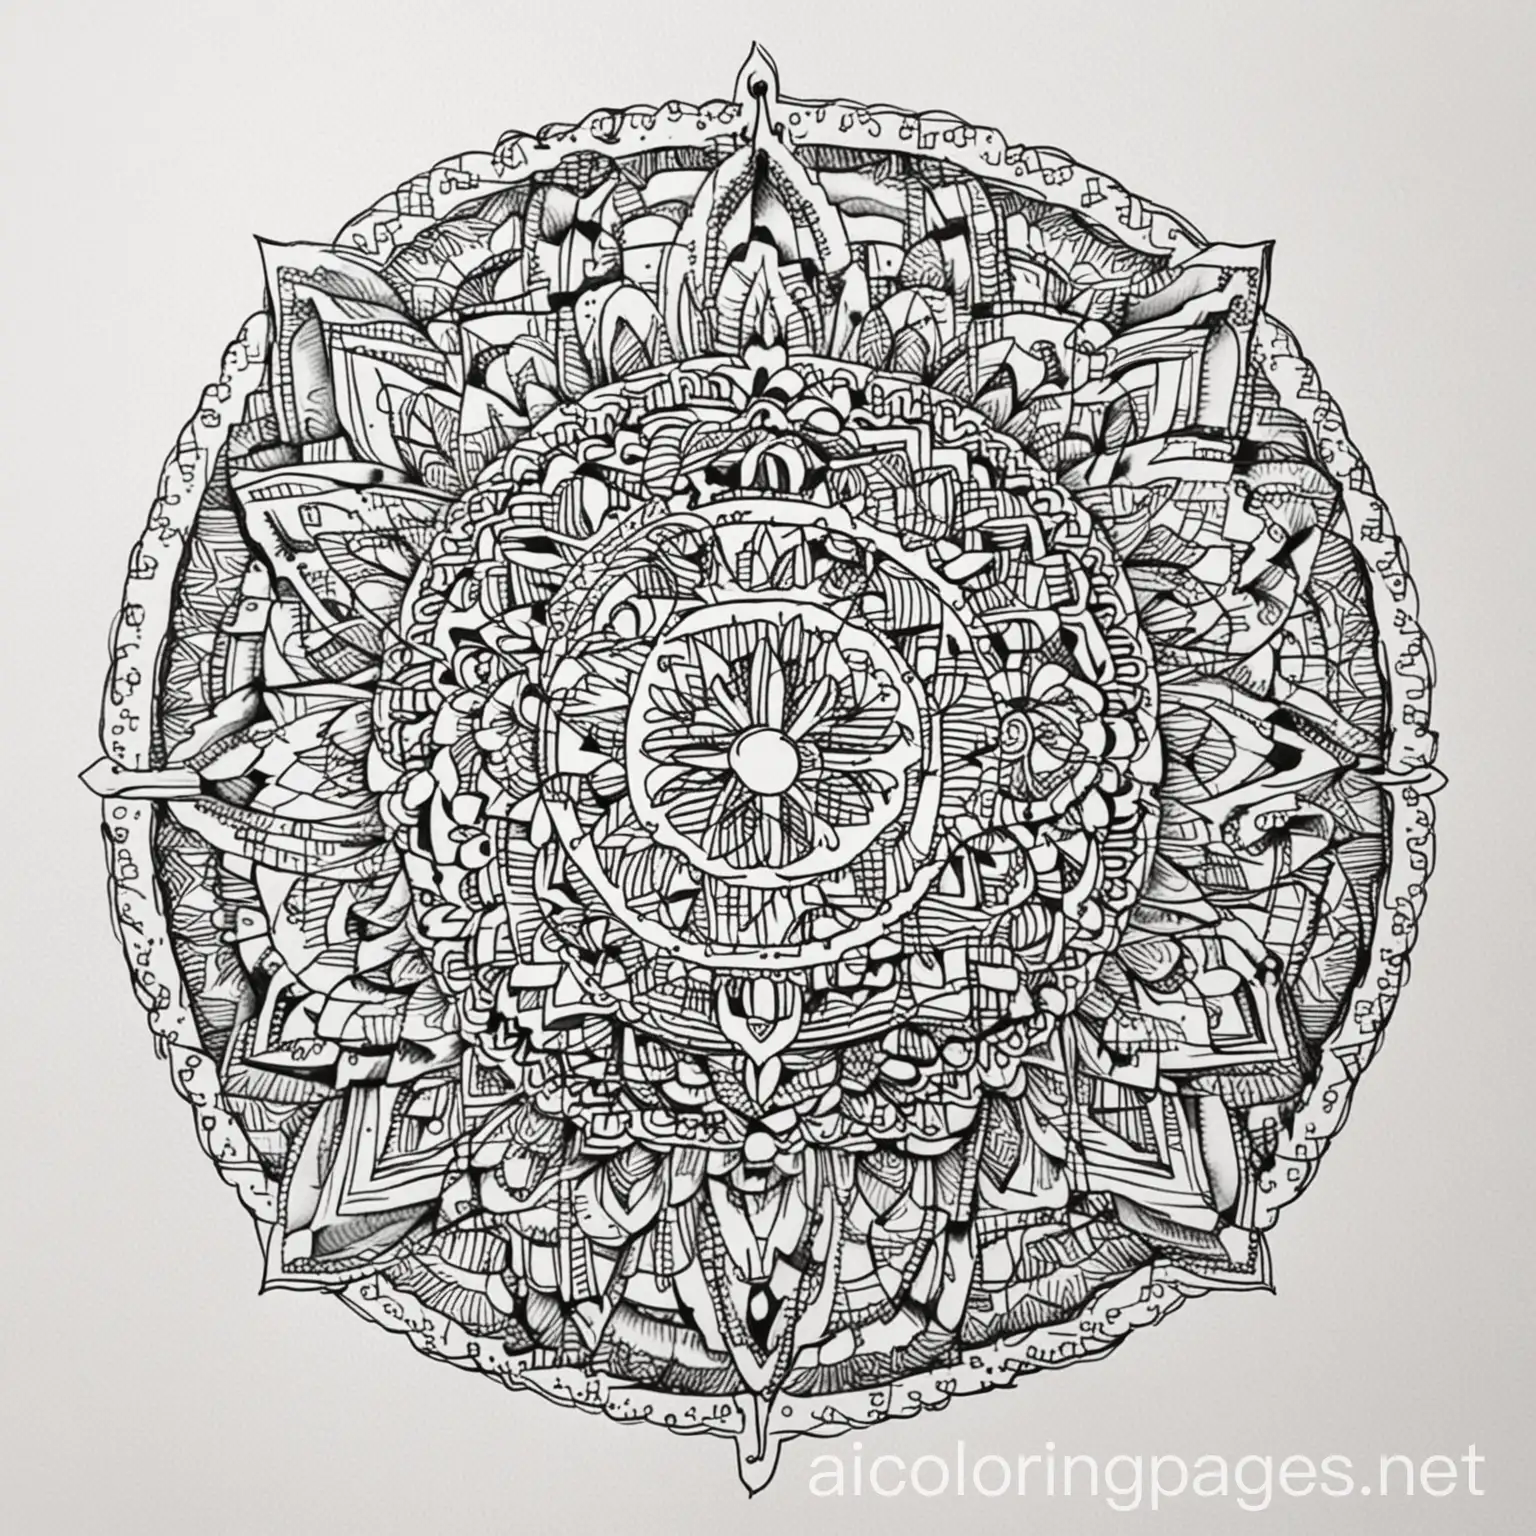 Mandala-Coloring-Page-for-Kids-Simple-Line-Art-on-White-Background